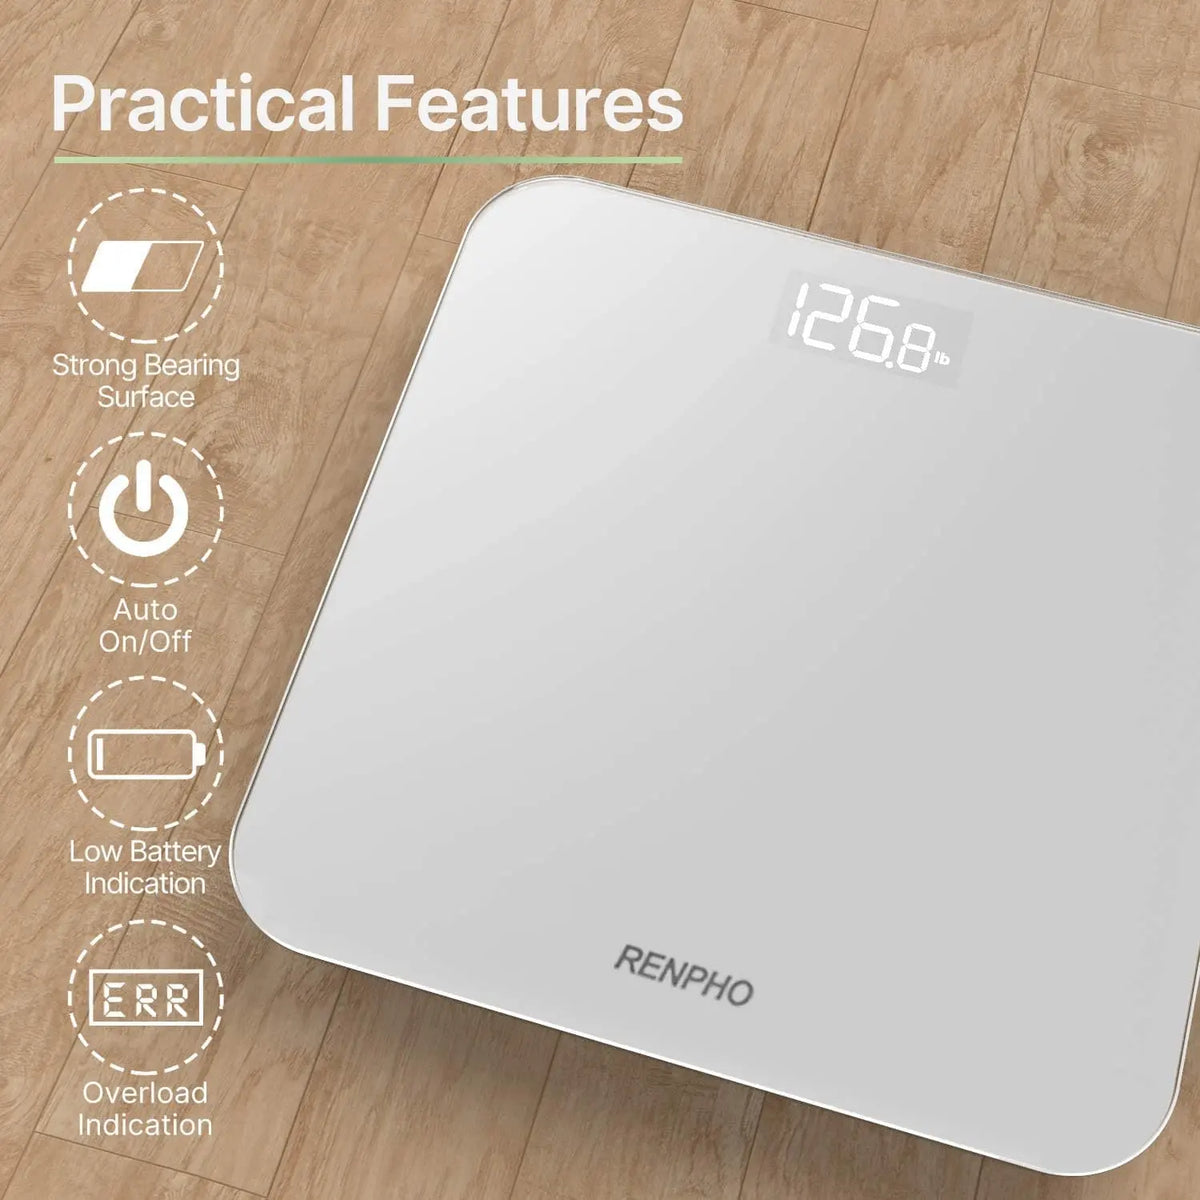 A sleek design, **Core 1S Bathroom Scale** with a white surface displays a body measurement of "126.8 lb." on a wooden floor. Feature highlights to the left include strong bearing surface, auto on/off, low battery indication, and overload indication. The brand "**Renpho EU**" is visible at the bottom.